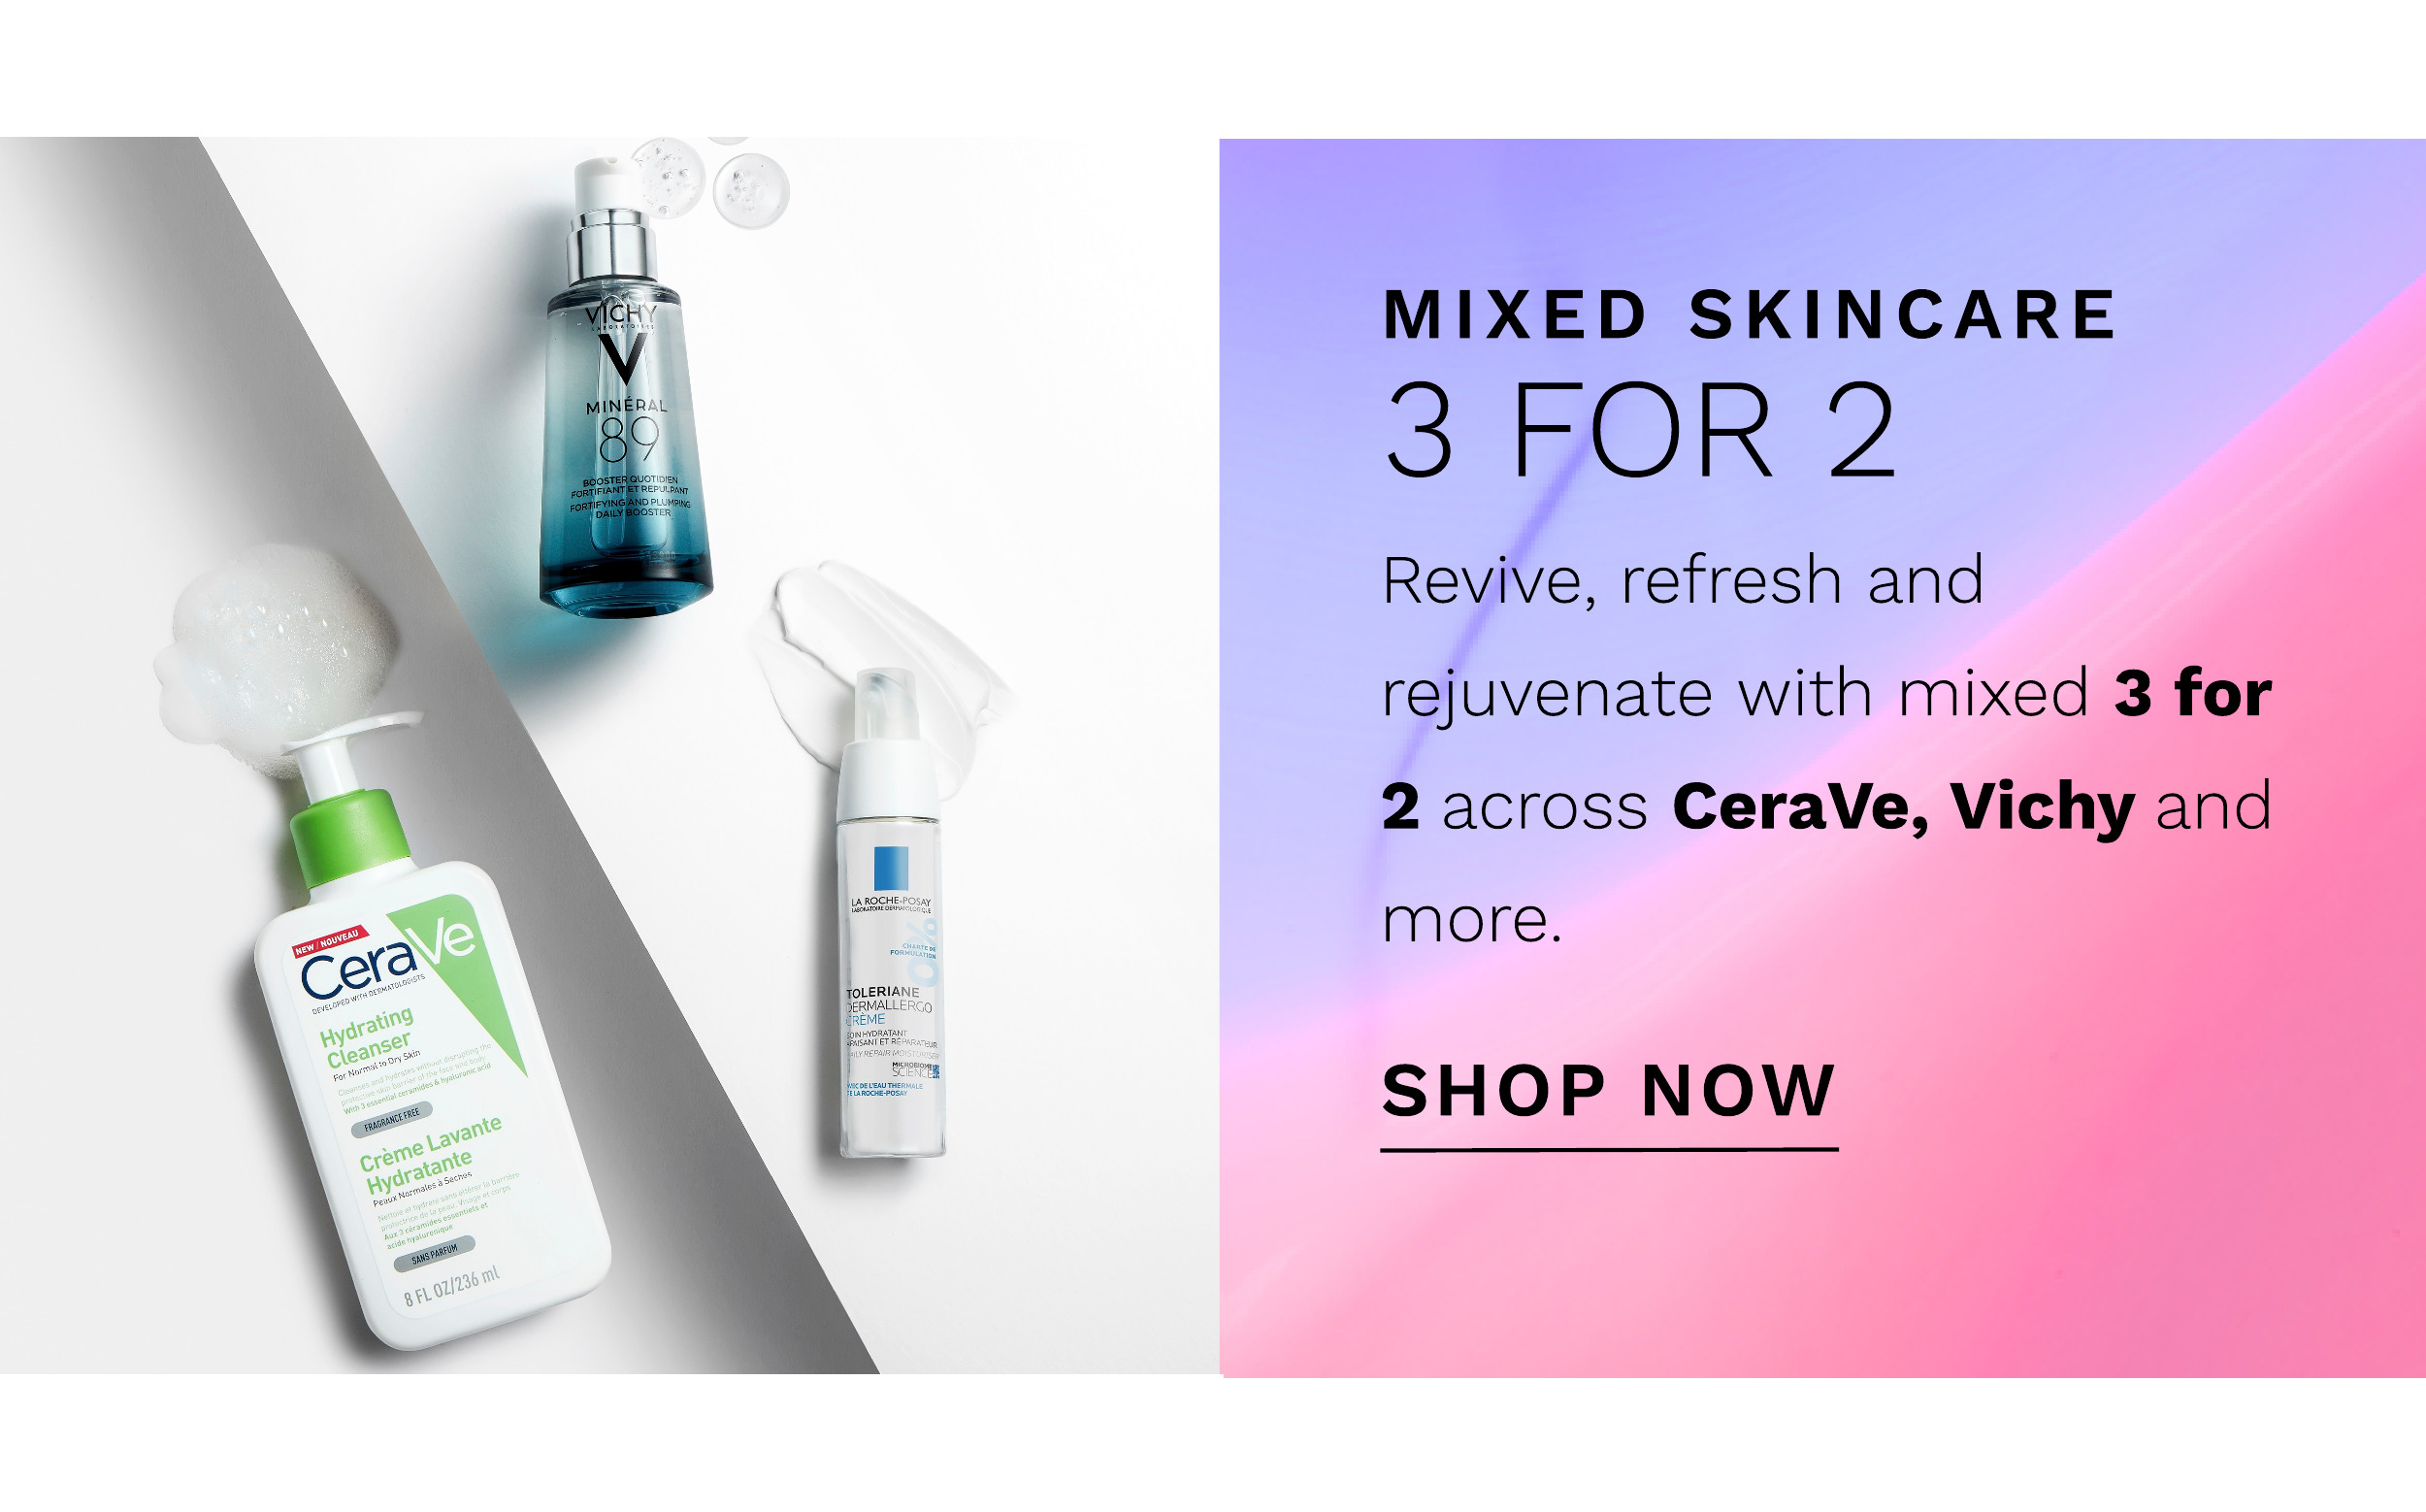 Mixed Skincare 3 For 2